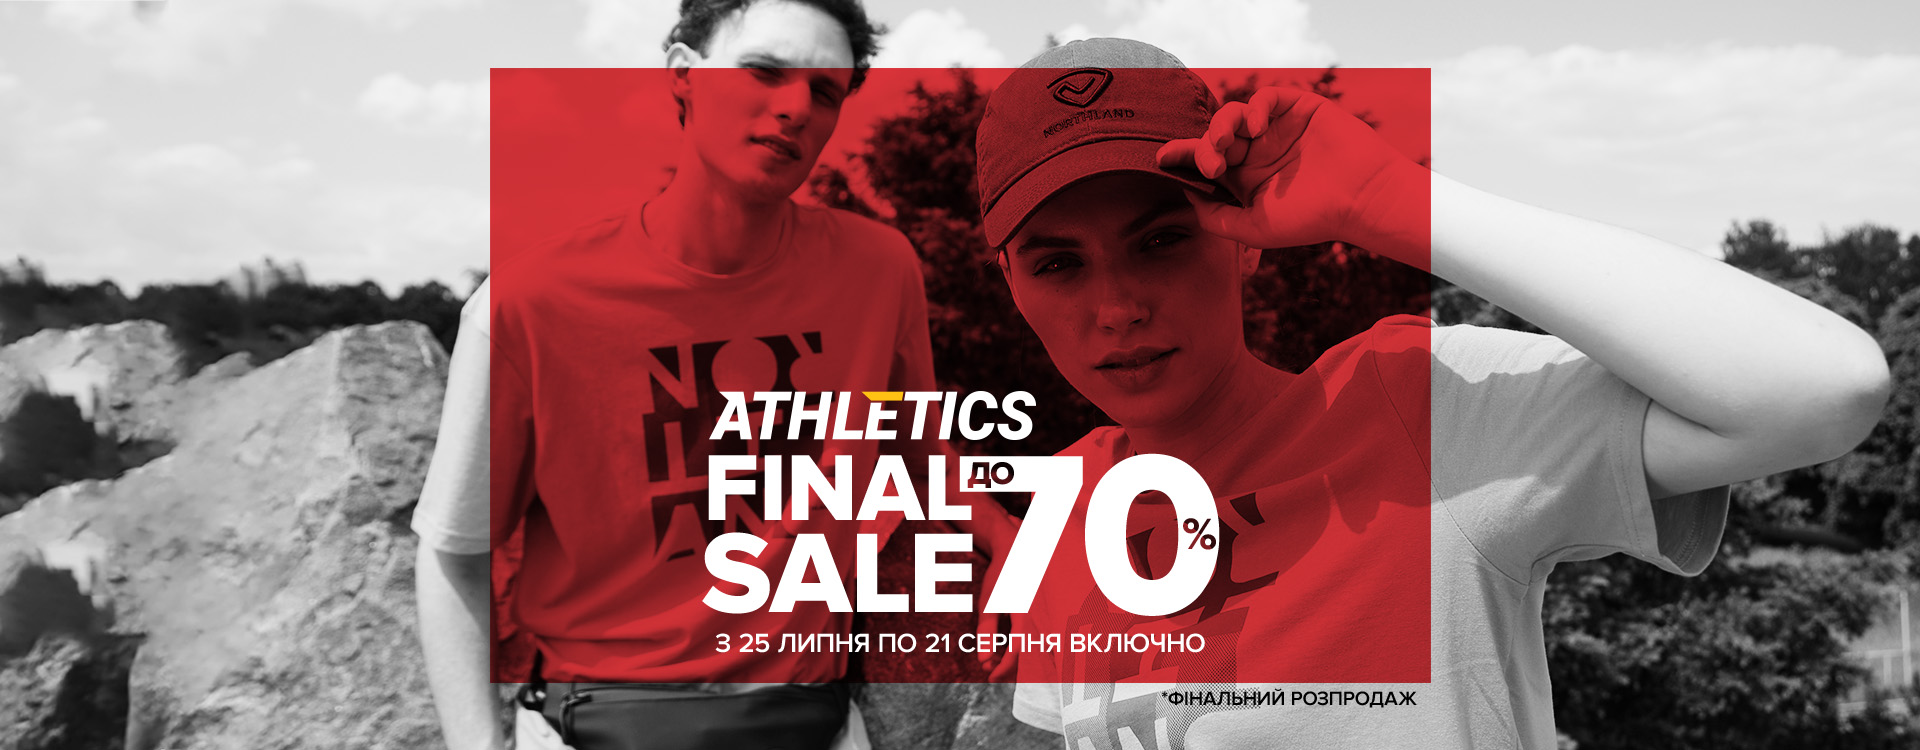 Final sale of the season at ATHLETICS